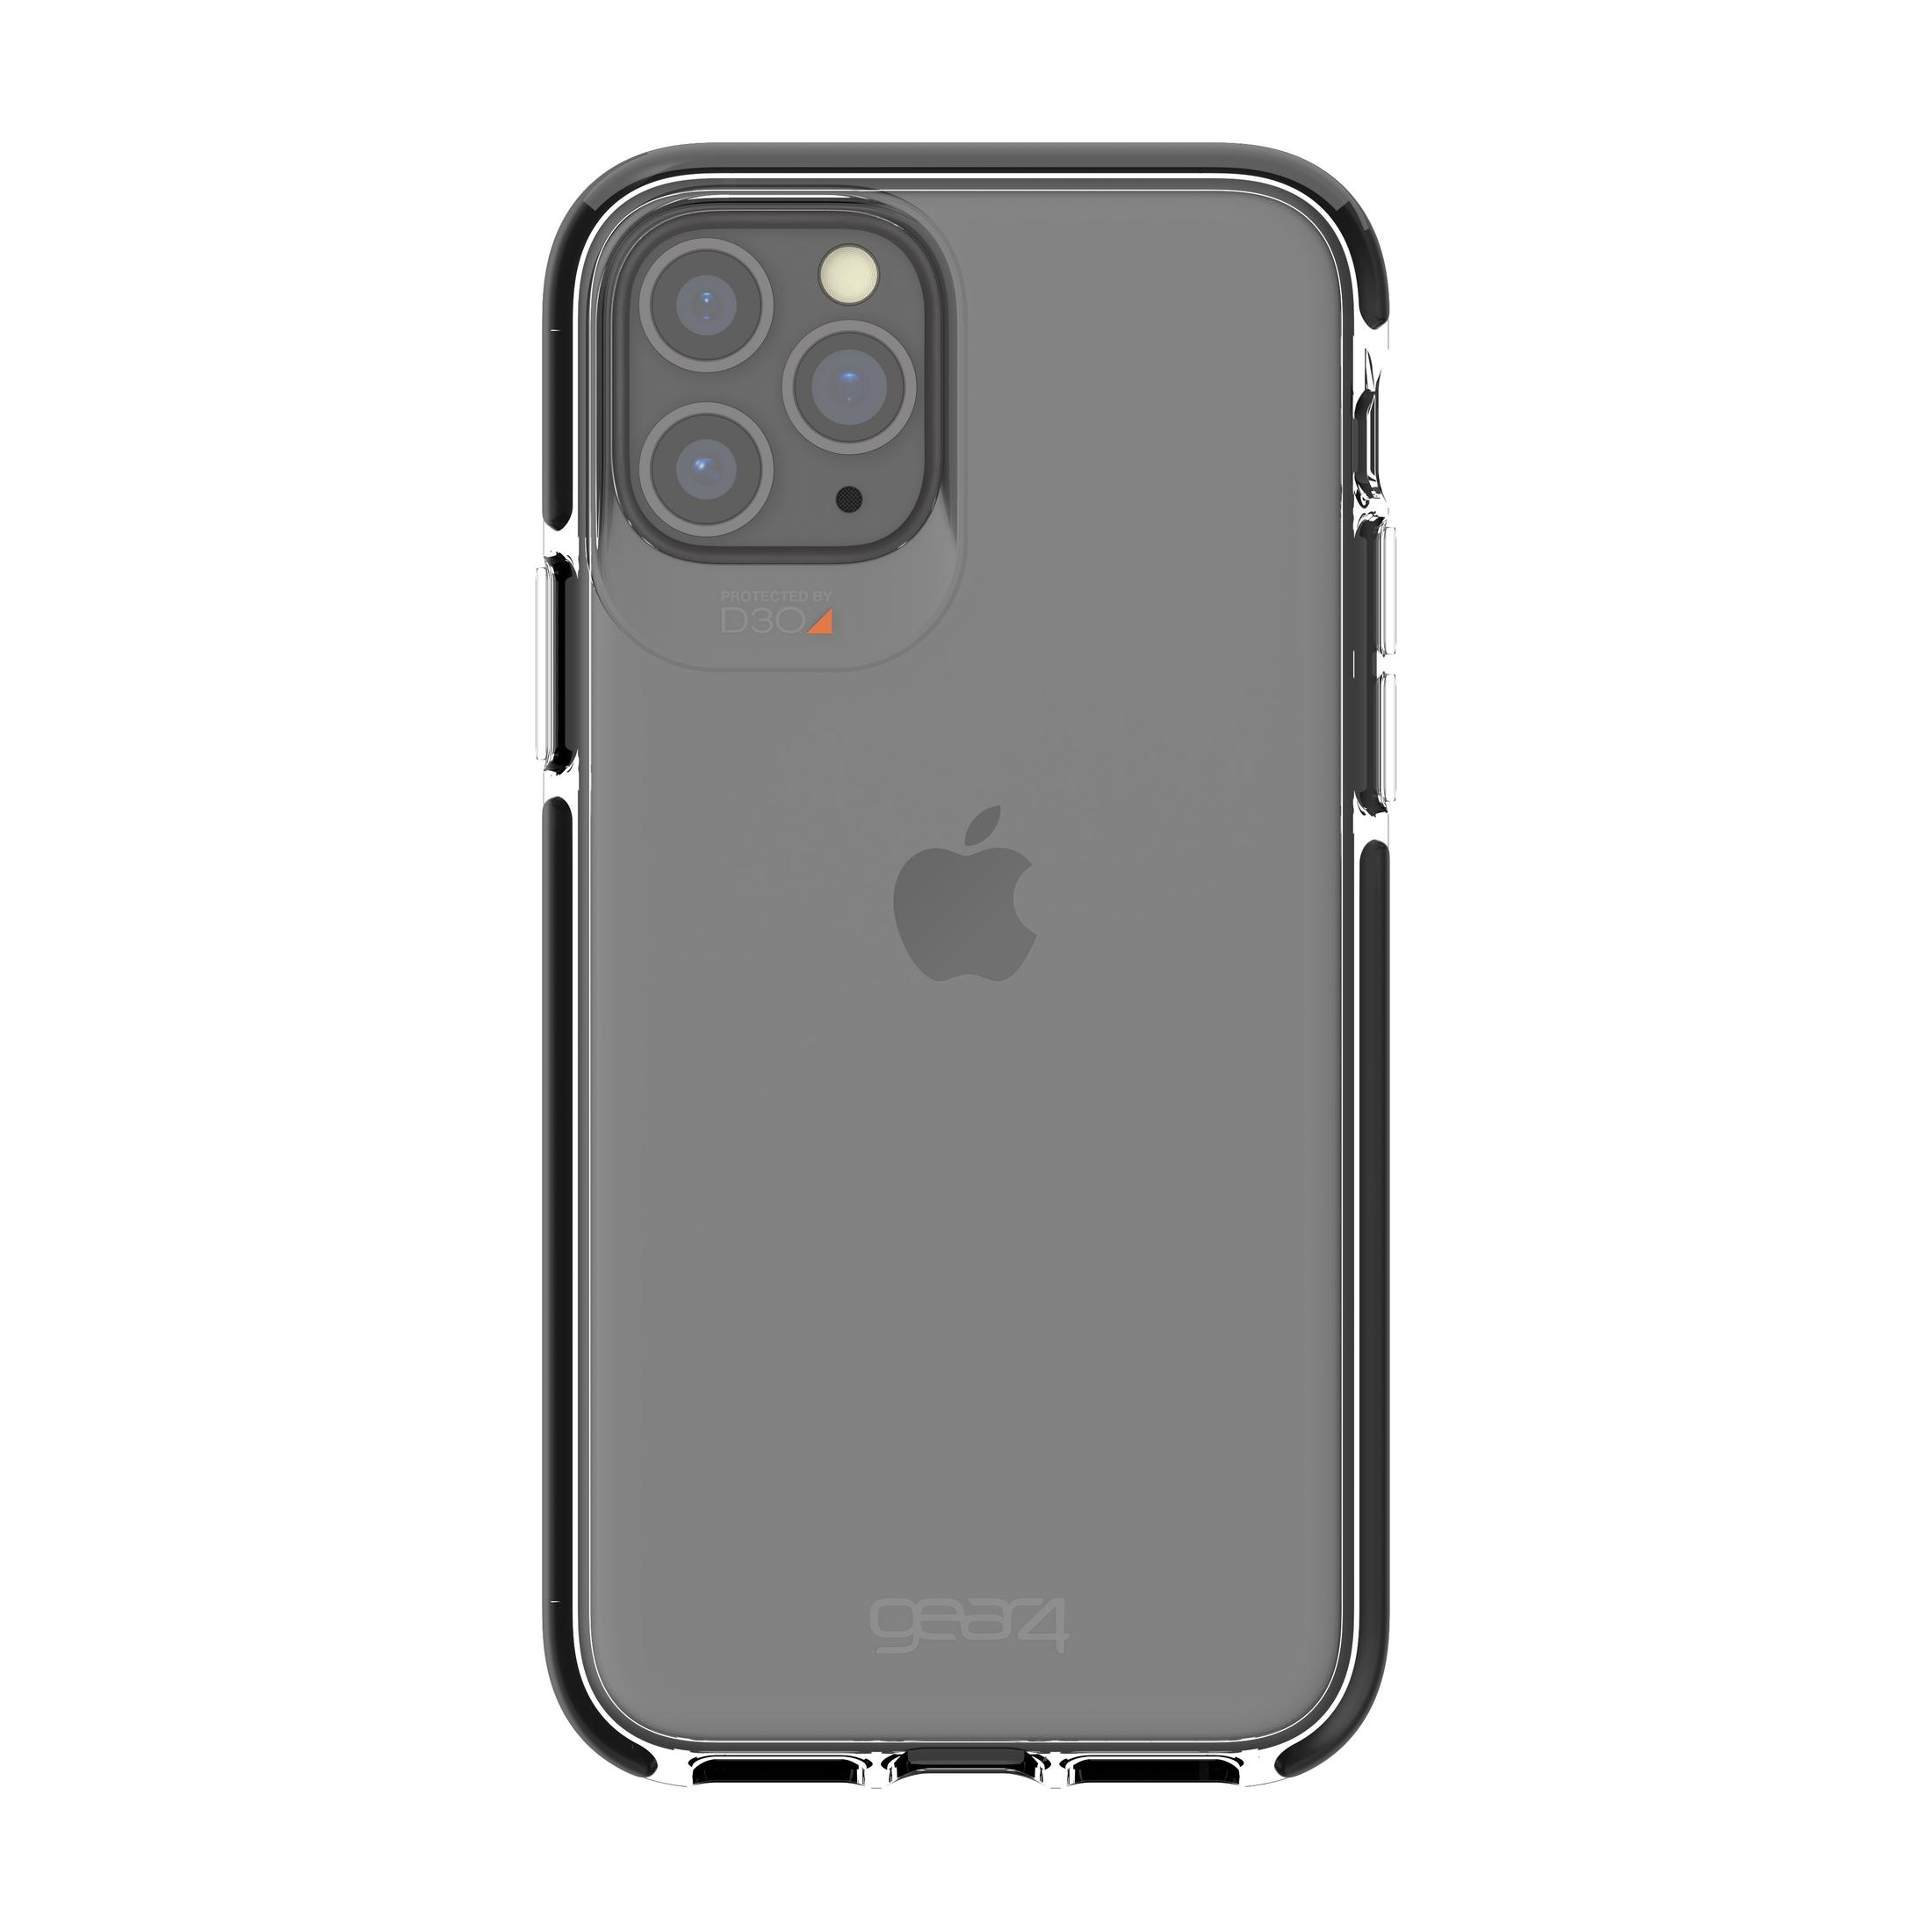 GEAR4 0S32919 PICCADILLY 11 (BLACK), IPHONE iPhone 11 Apple, PRO Pro, Backcover, Schwarz